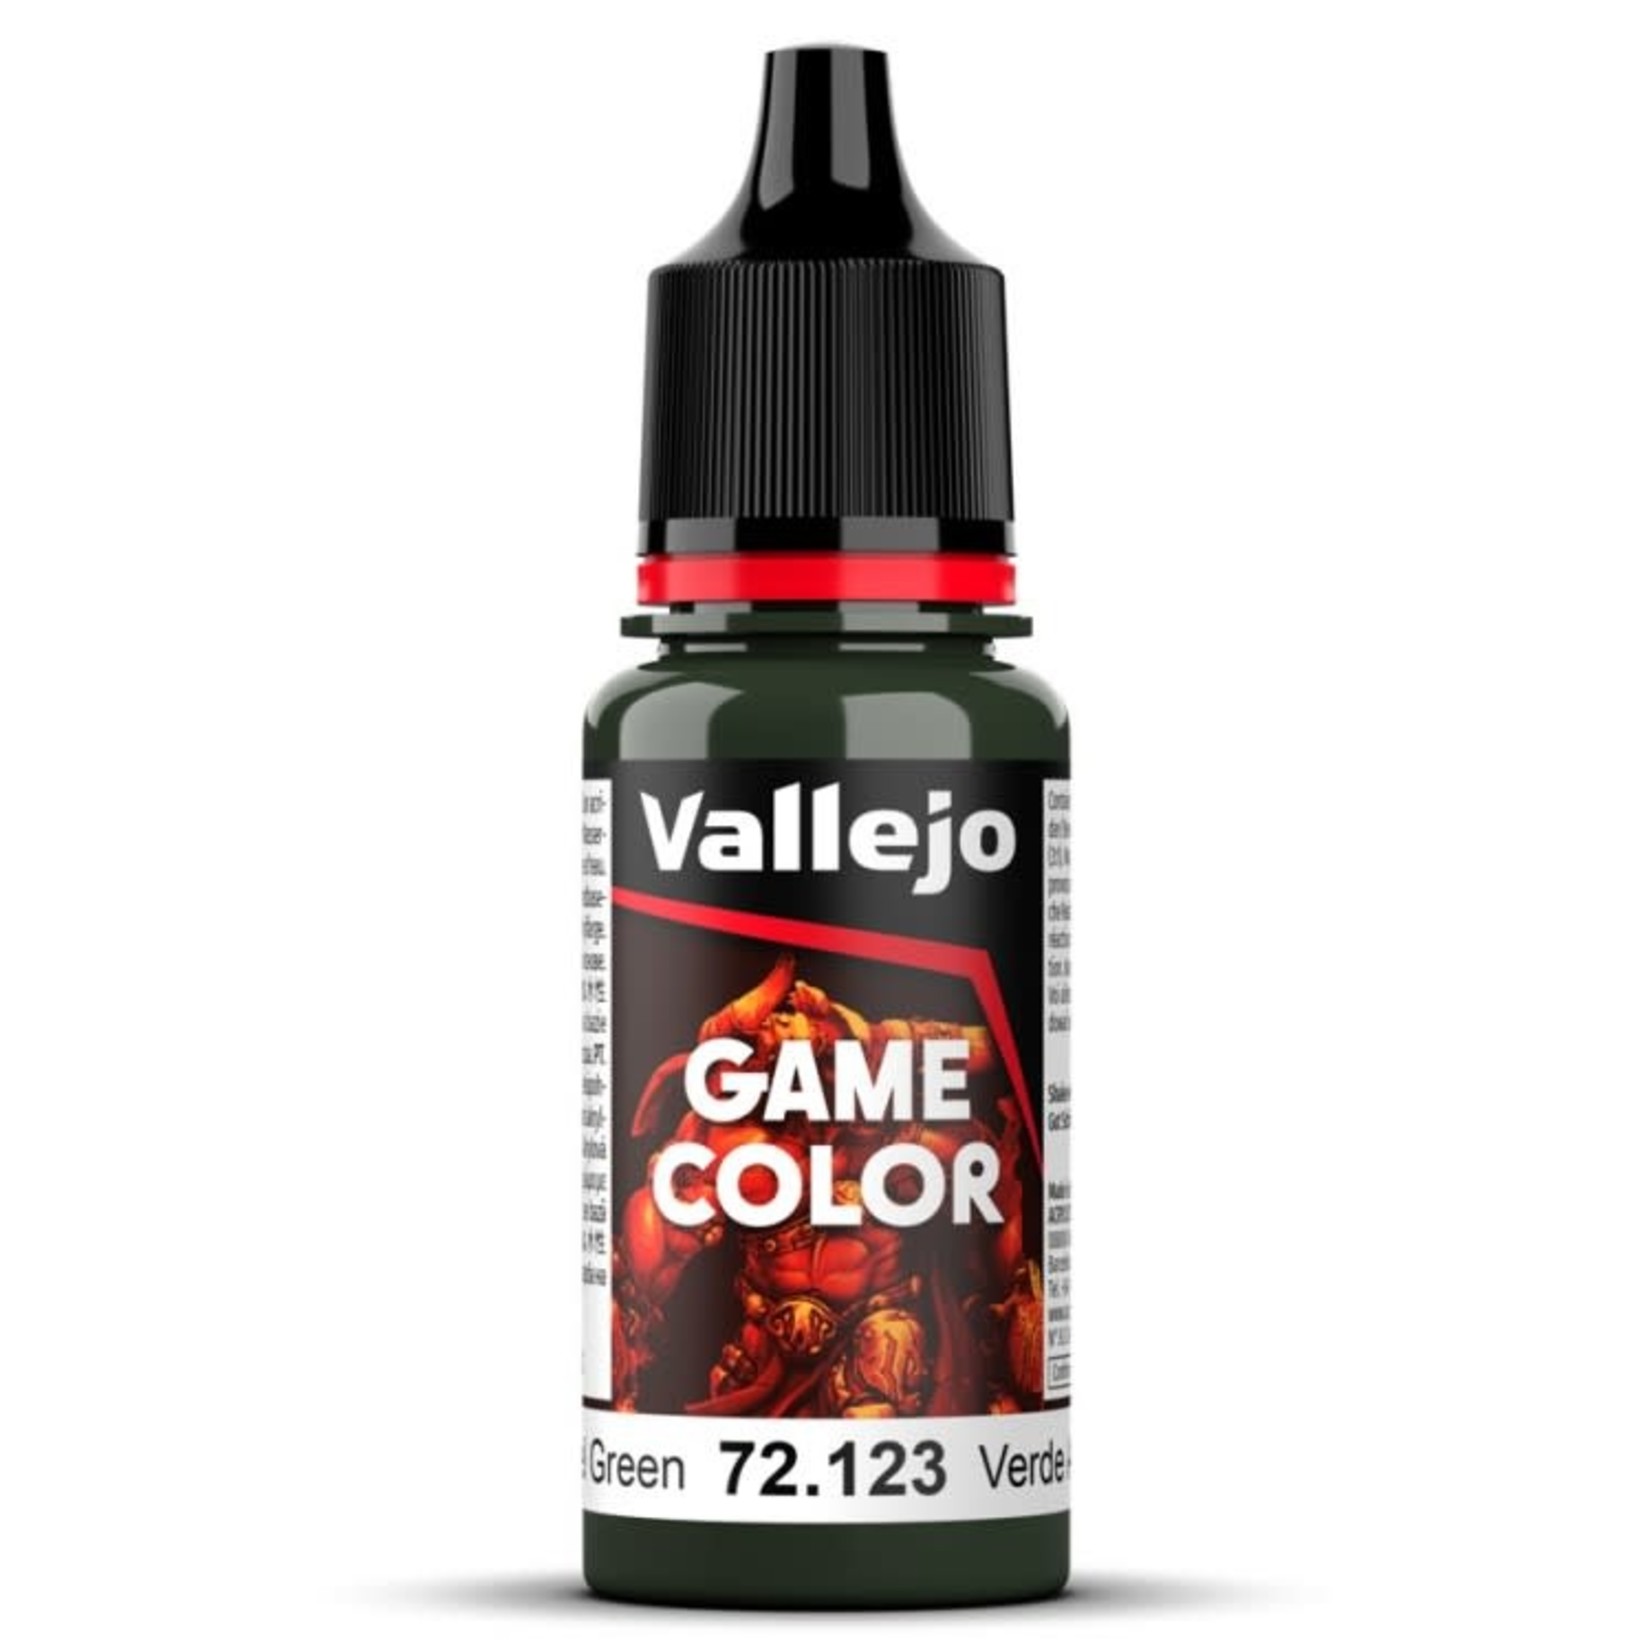 Vallejo Paint: Game Color (Angel Green)